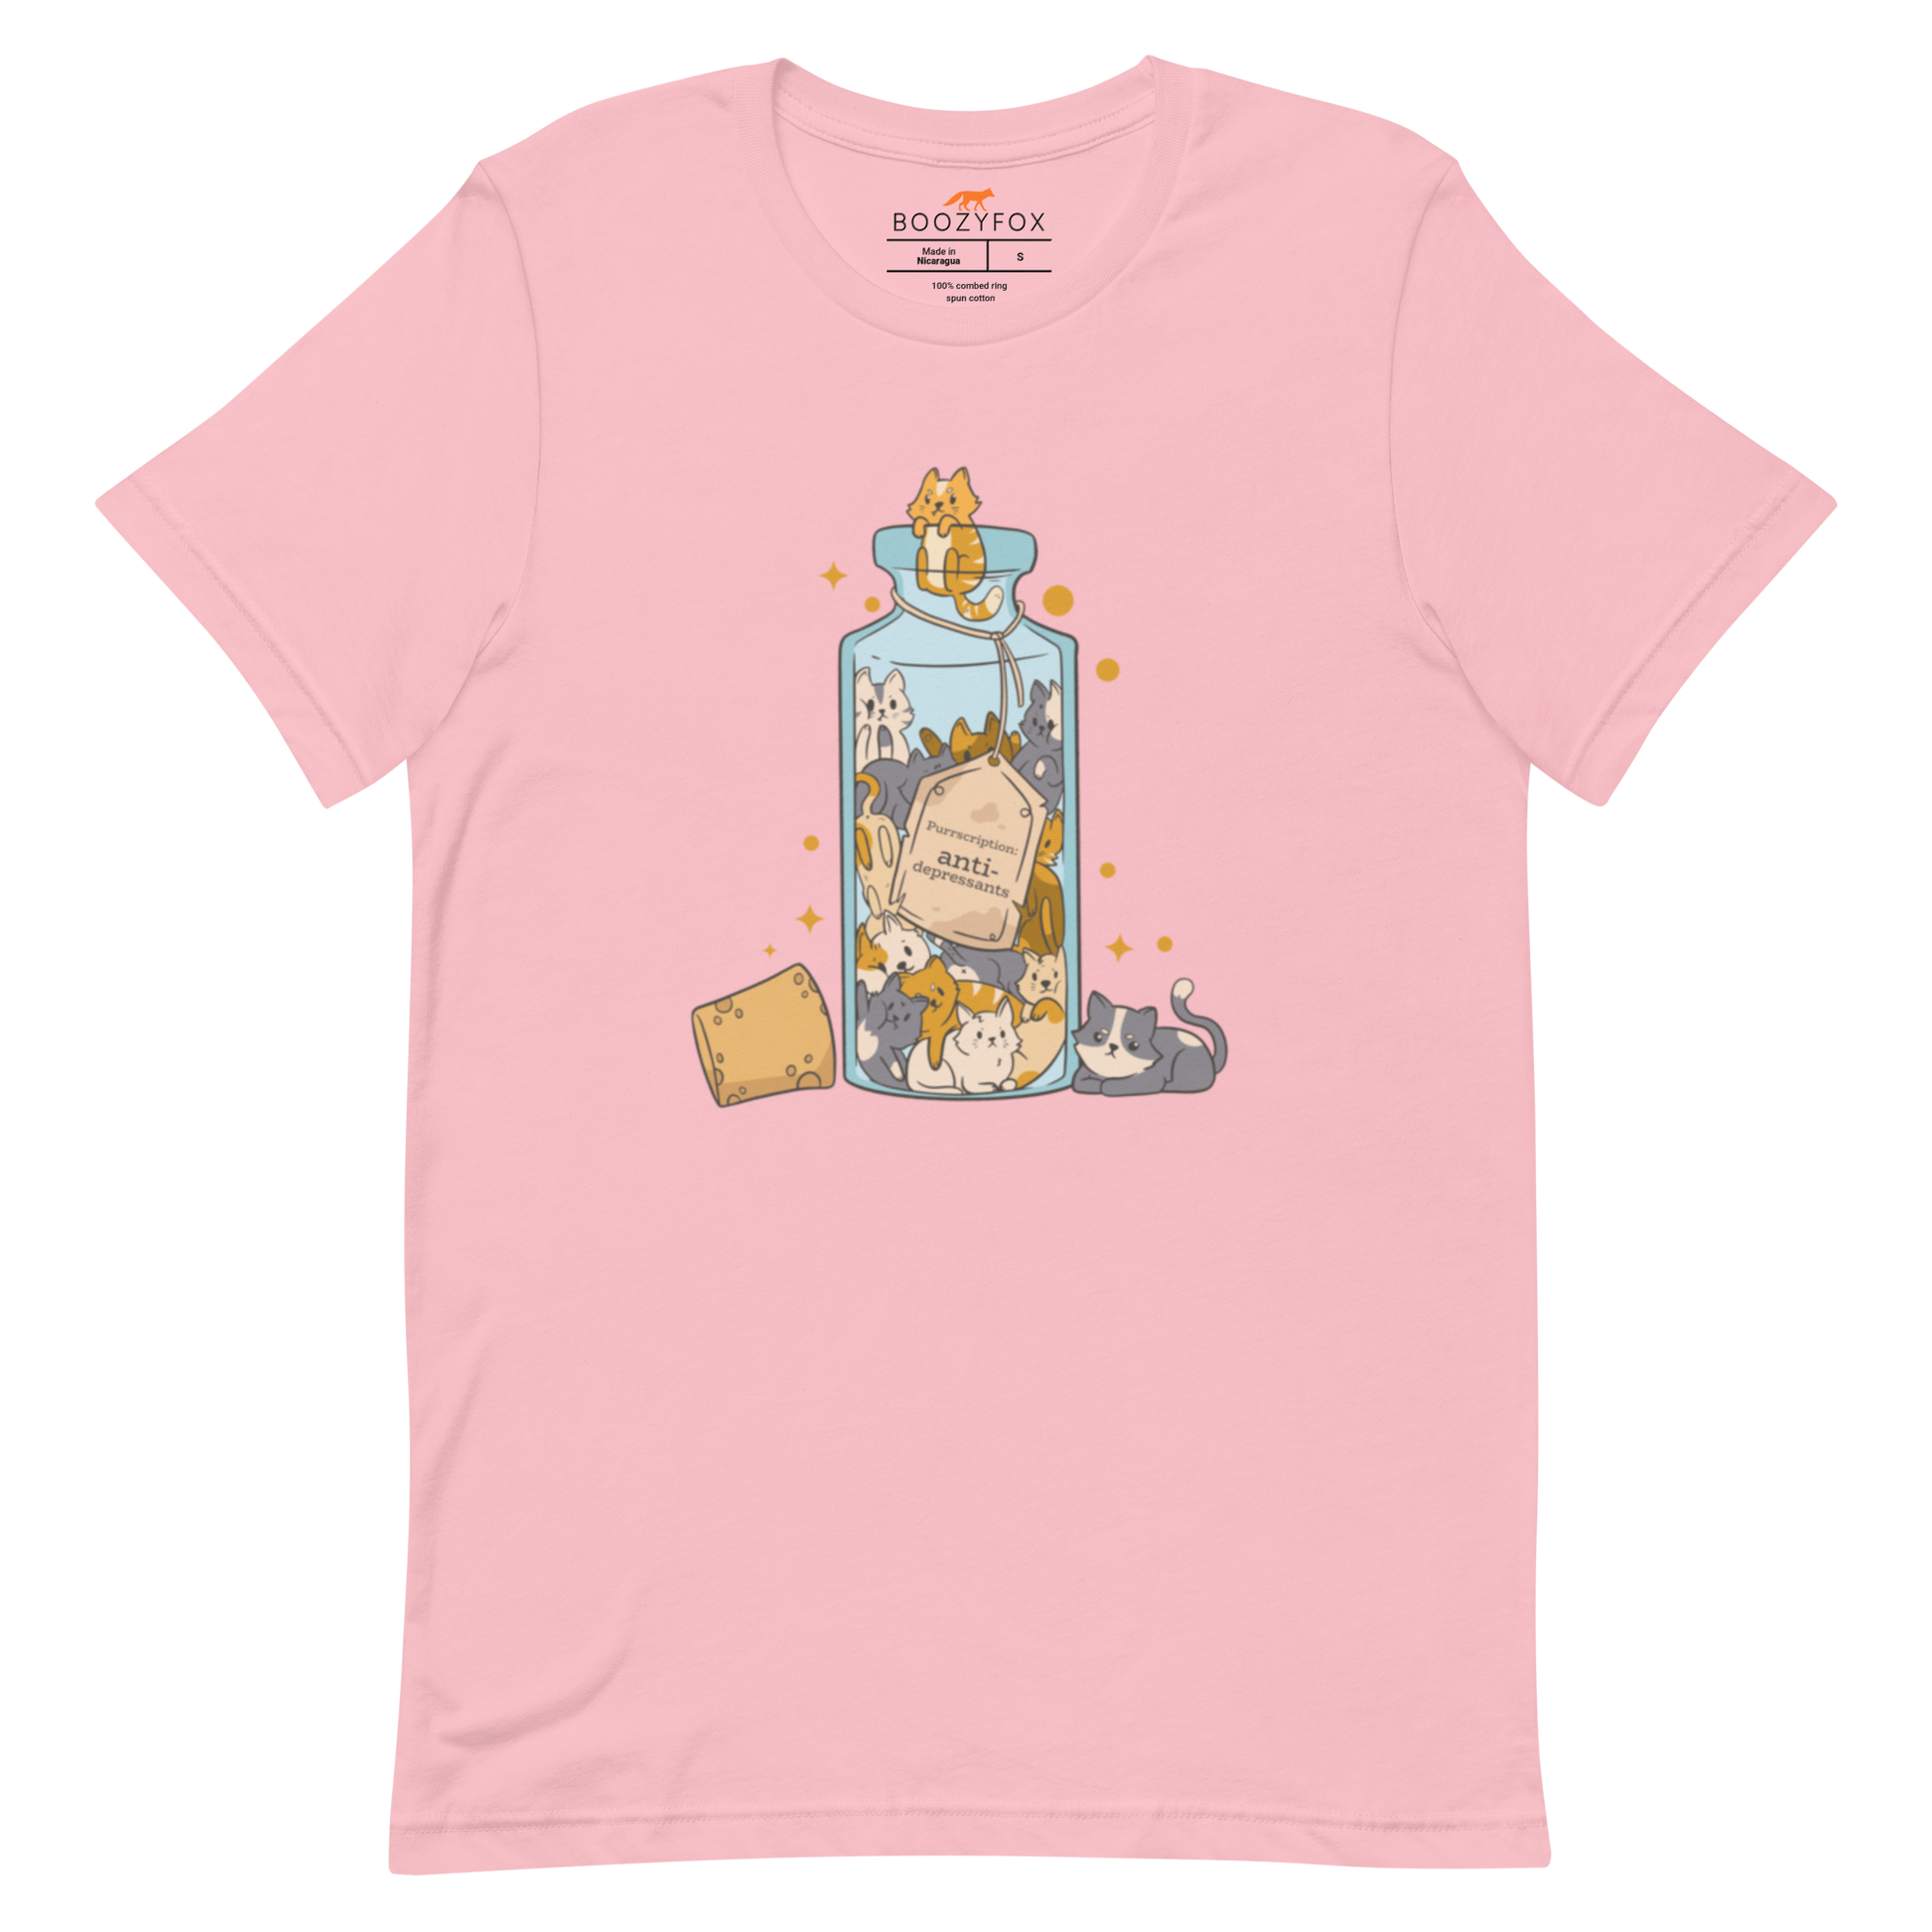 Pink Premium Cat T-Shirt featuring a funny Anti-Depressants graphic on the chest - Cute Graphic Cat Tees - Boozy Fox